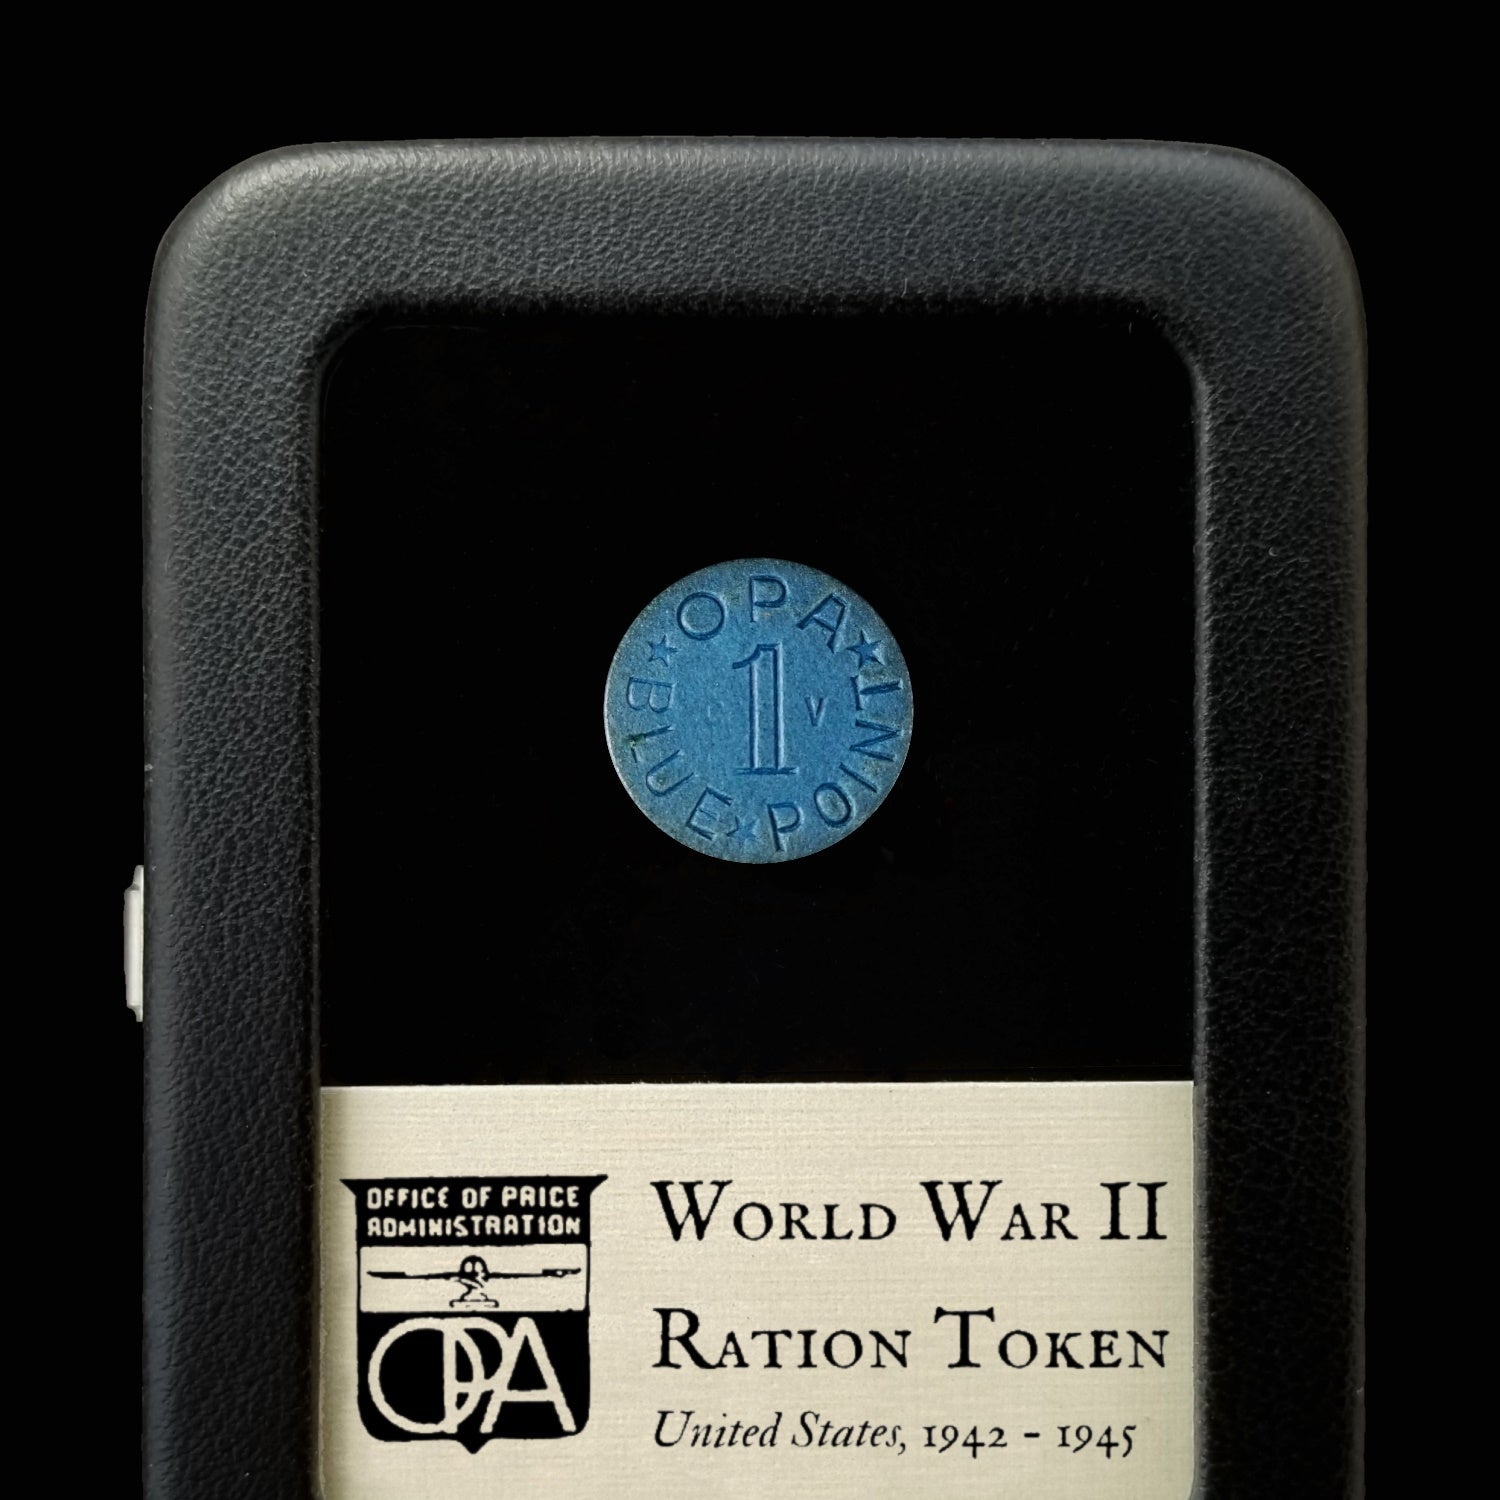 World War II OPA Ration Tokens - 1942 - United States